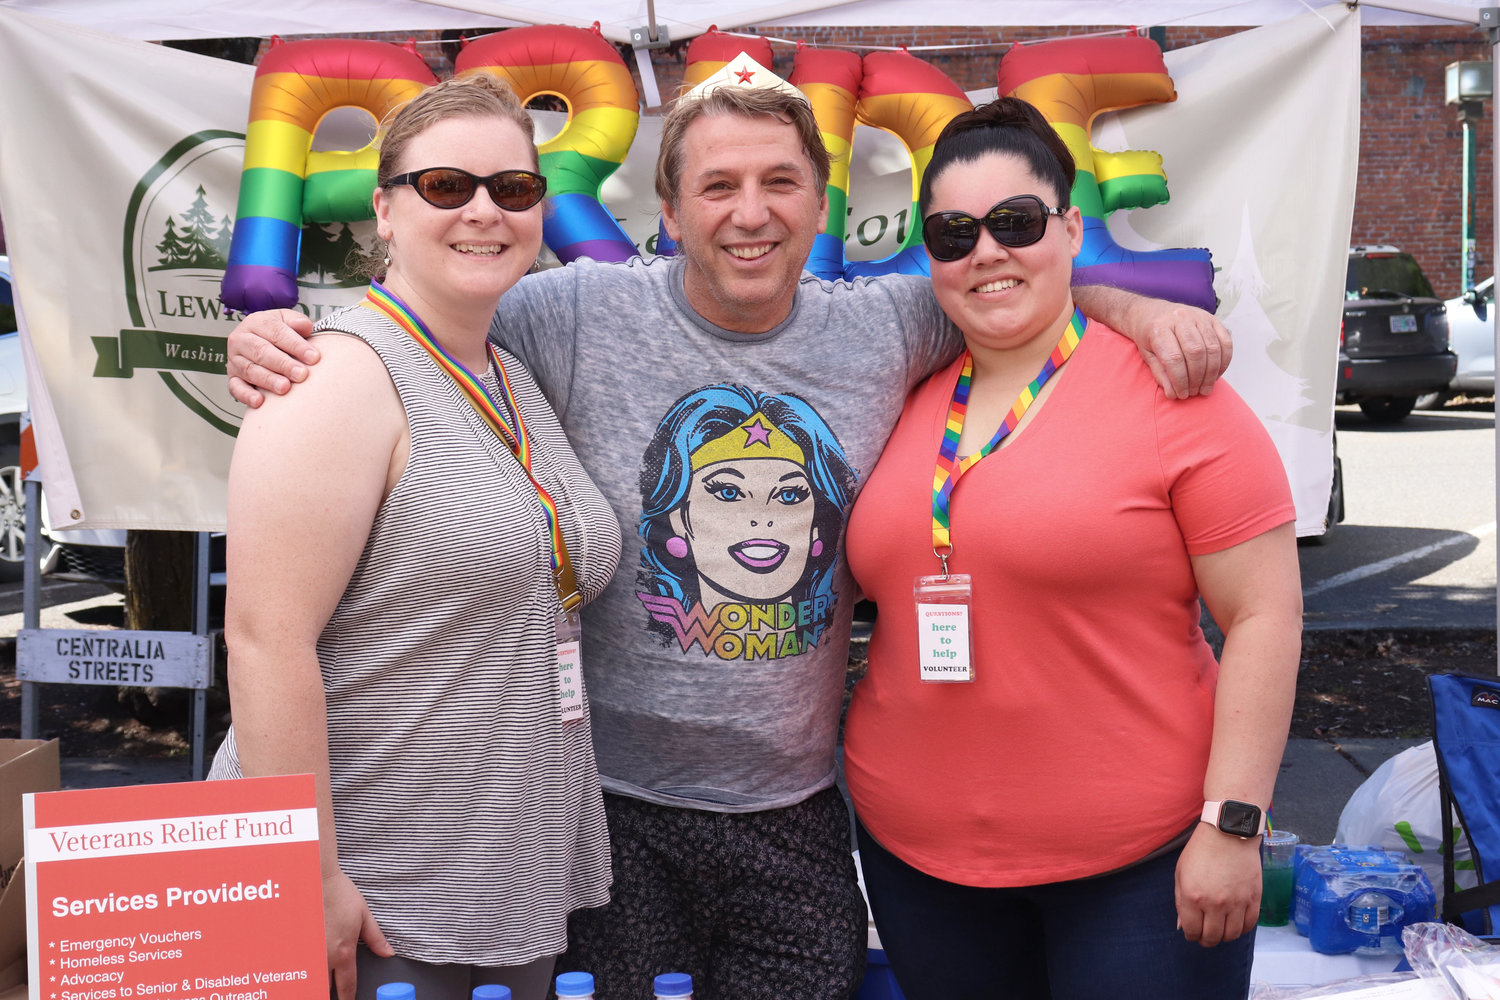 From left, Lindsey Shenkle, Bryan Hall and Justia Madrigal of Lewis County Public Health & Social Services pose for a photo at Lewis County Pride in Centralia on Saturday.